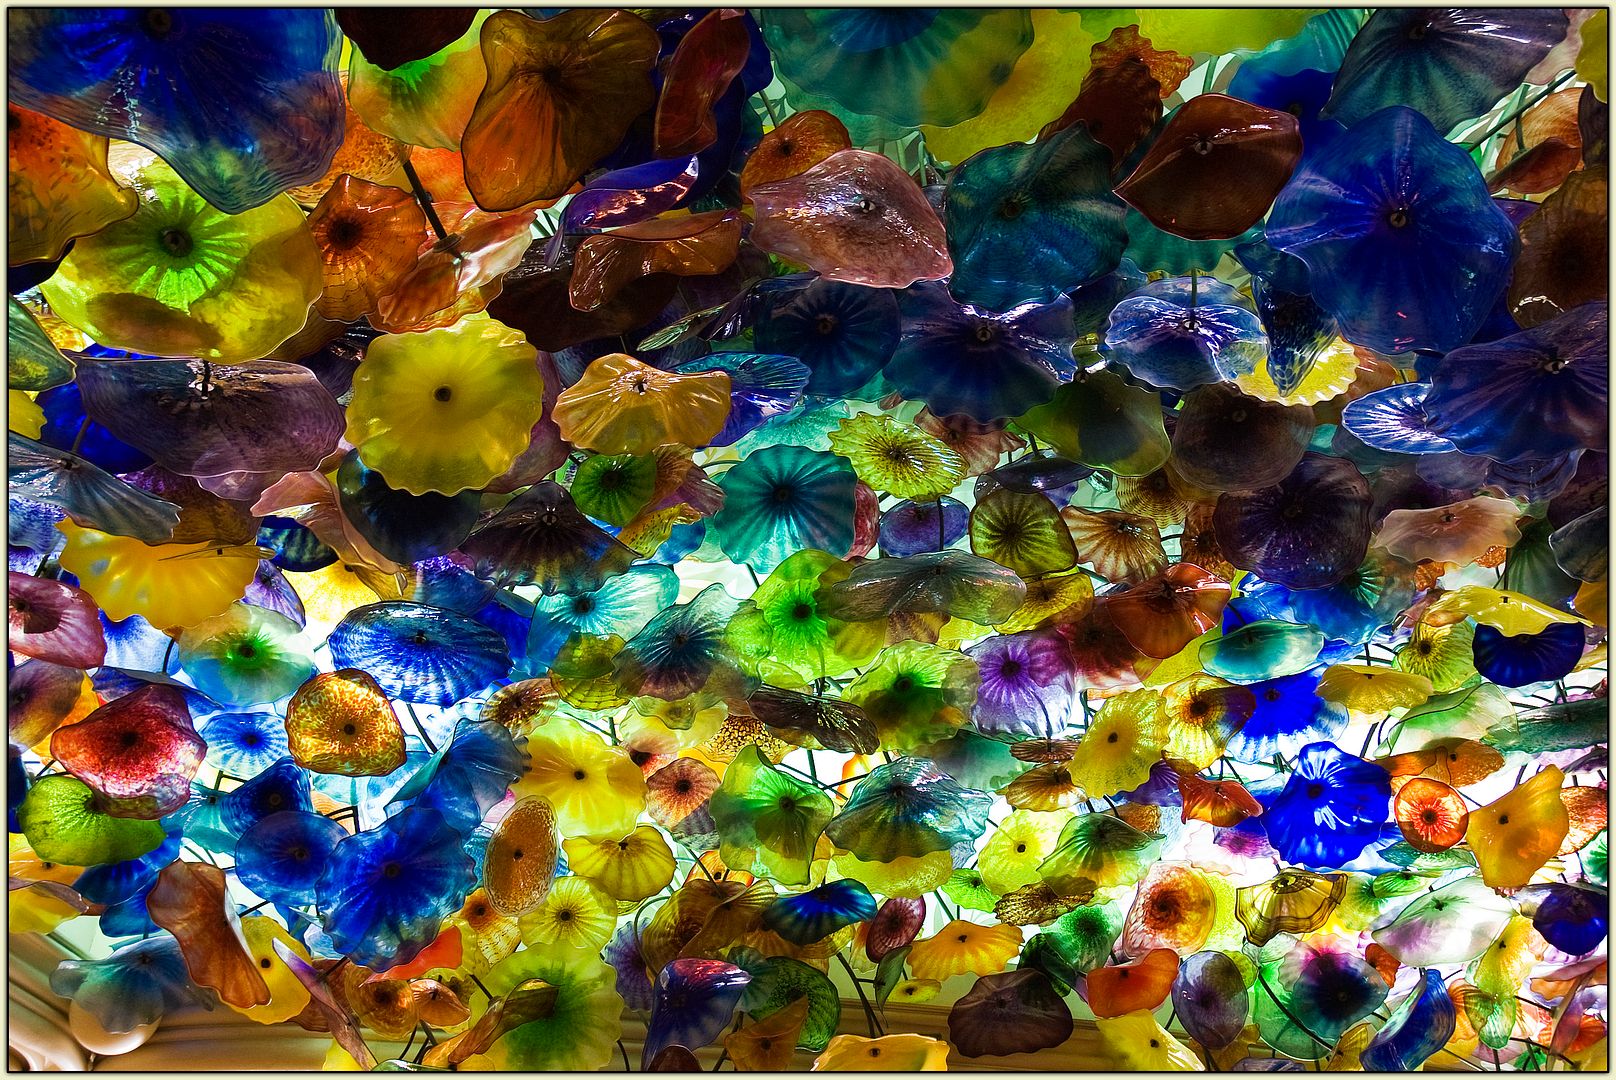 Chihuly Ceiling, Bellagio